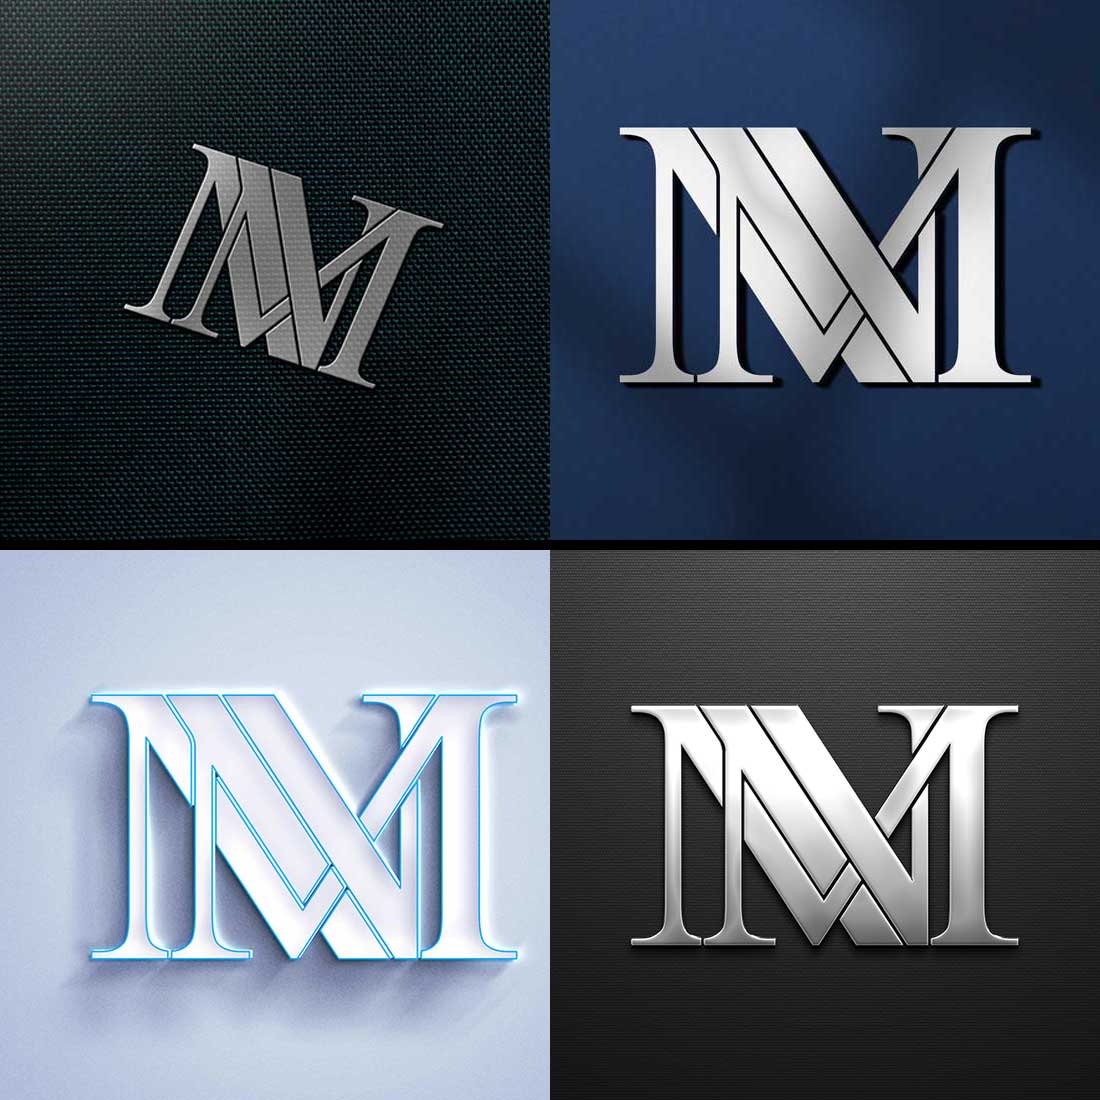 Mm Monogram designs, themes, templates and downloadable graphic